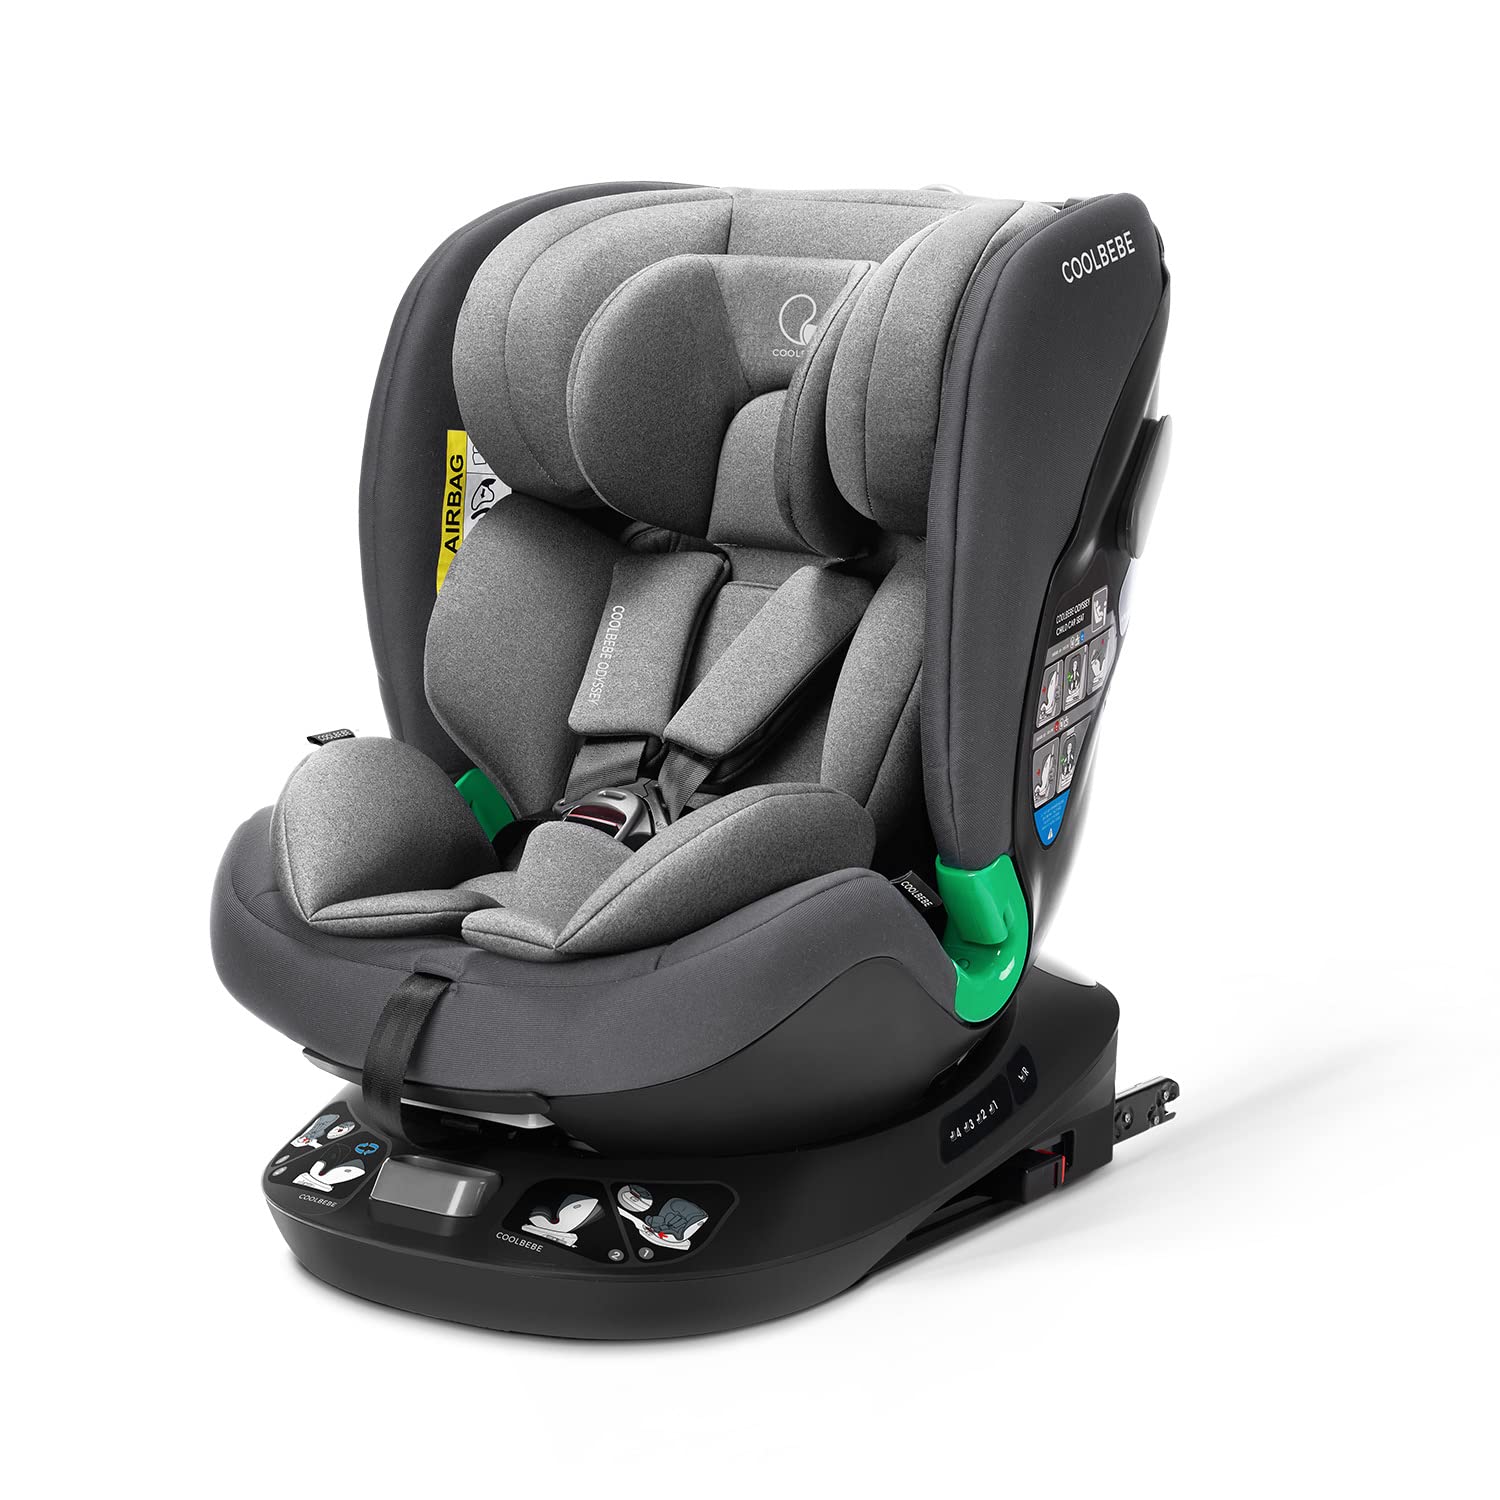 Coolbebe Odyssey 360° Rotatable Child Seat, i-Size Car Seat from 40-135 cm (0-10 Years) with ISOFIX and Top Tether for Children, with Maximum Side Impact Protection, Child Car Seat, ECE R129 (Grey)